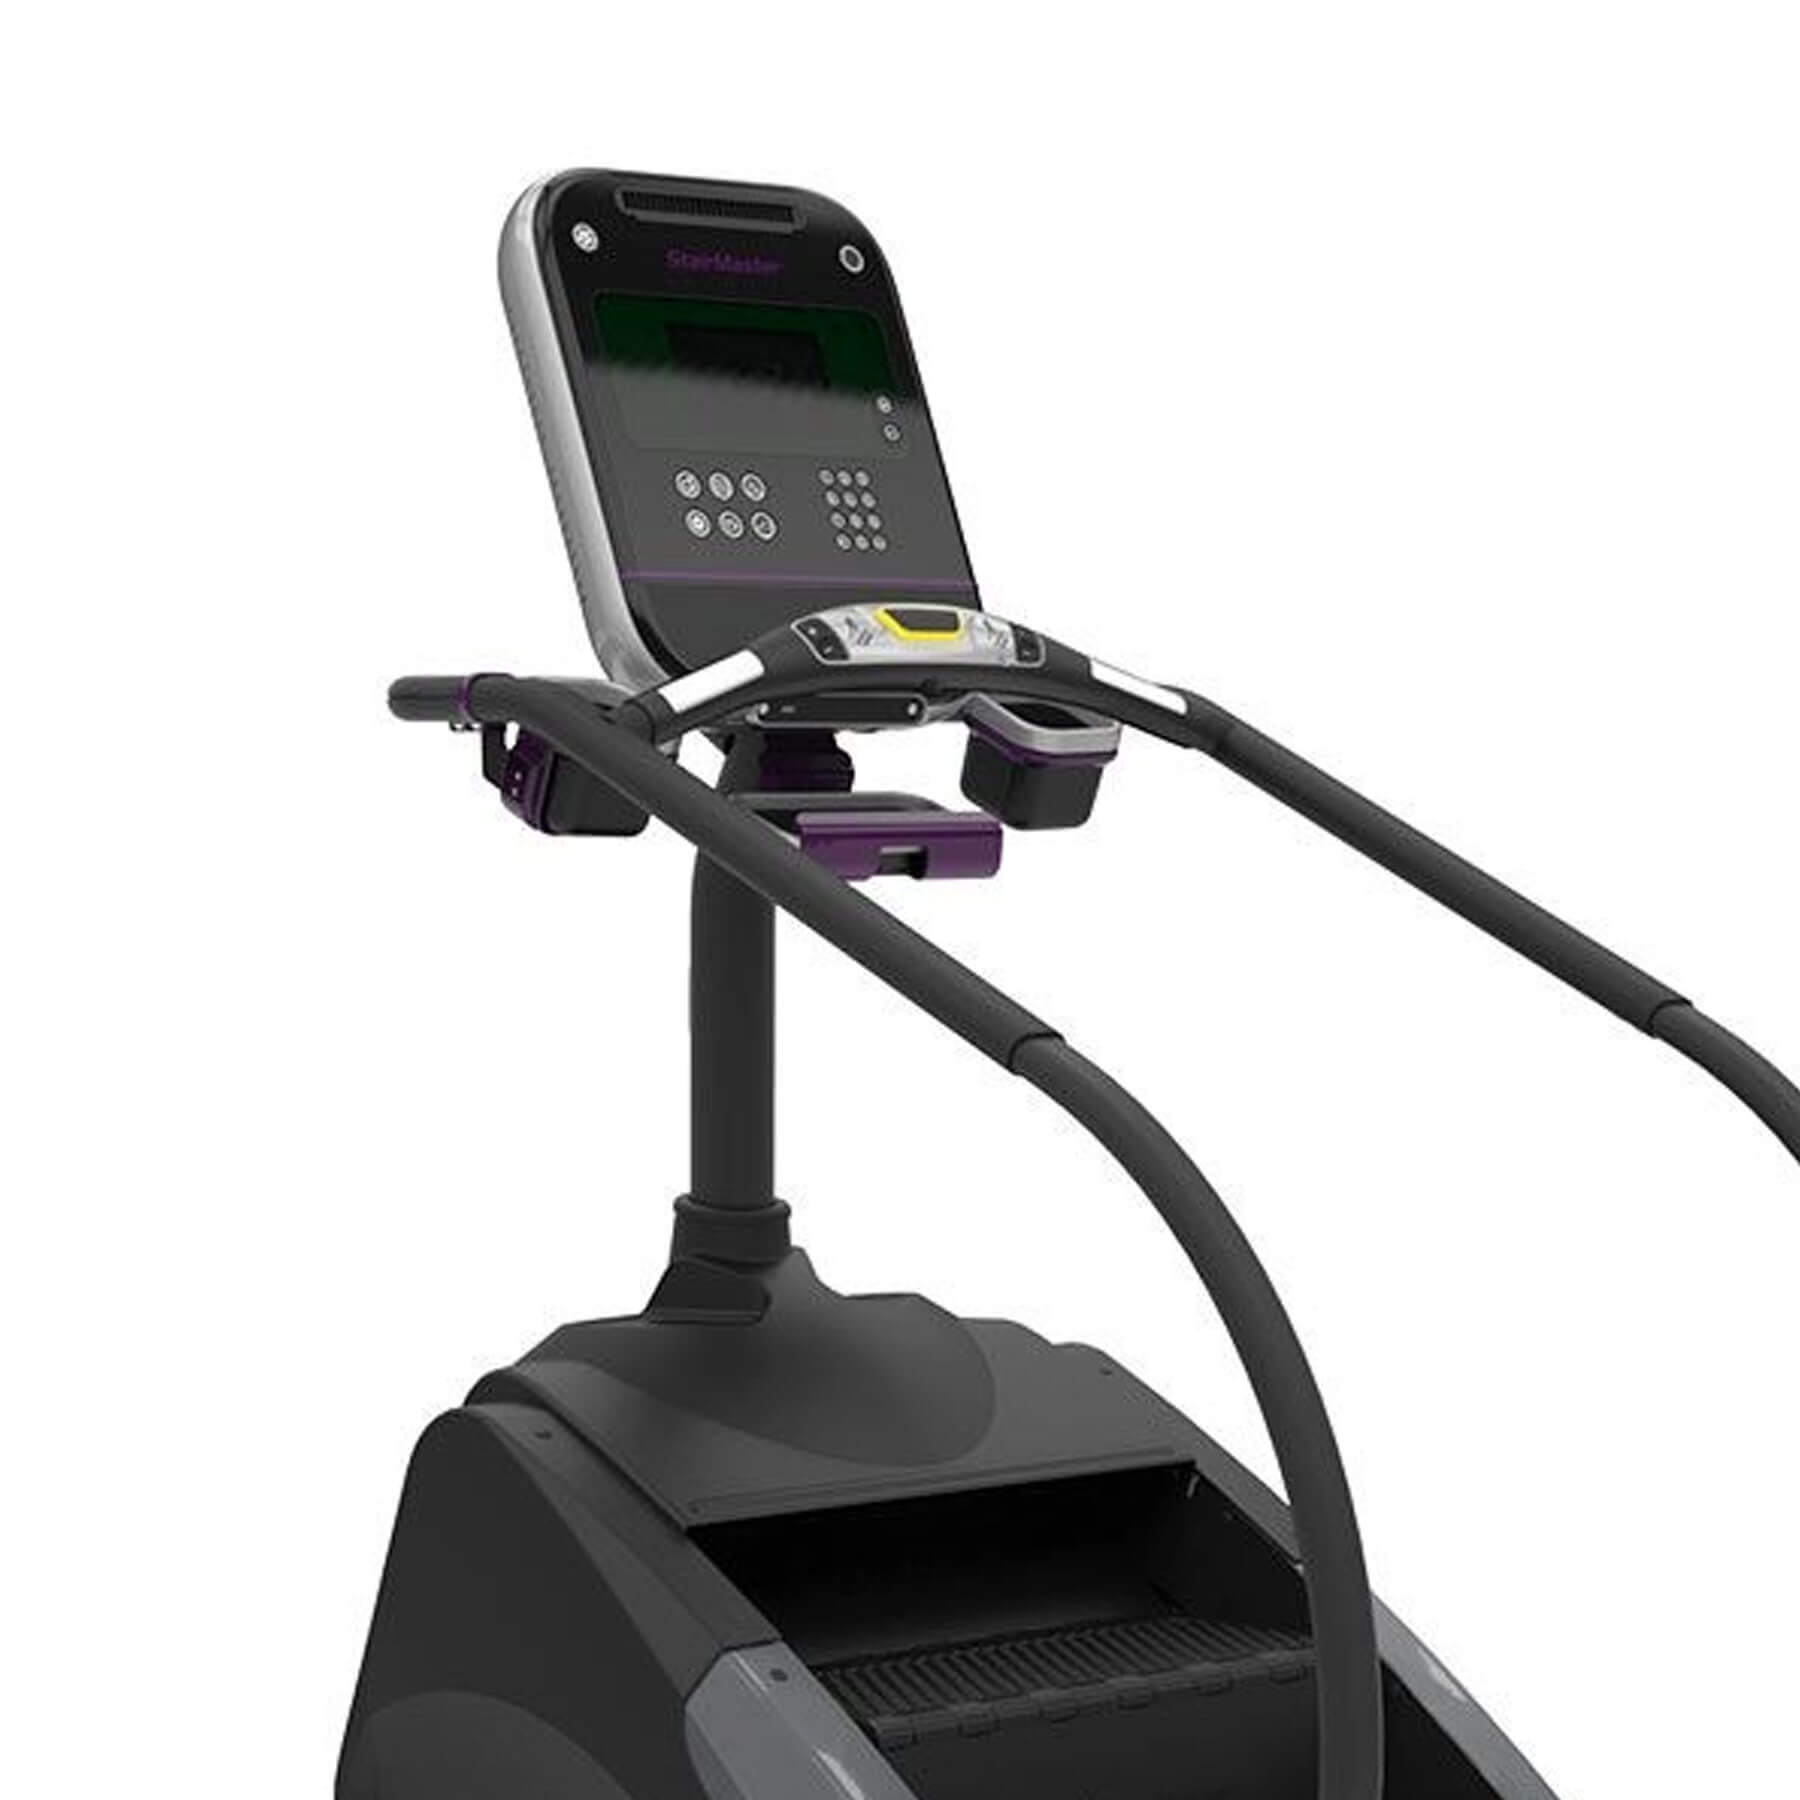 the lcd console and handlebars of a stairmaster cardio machine